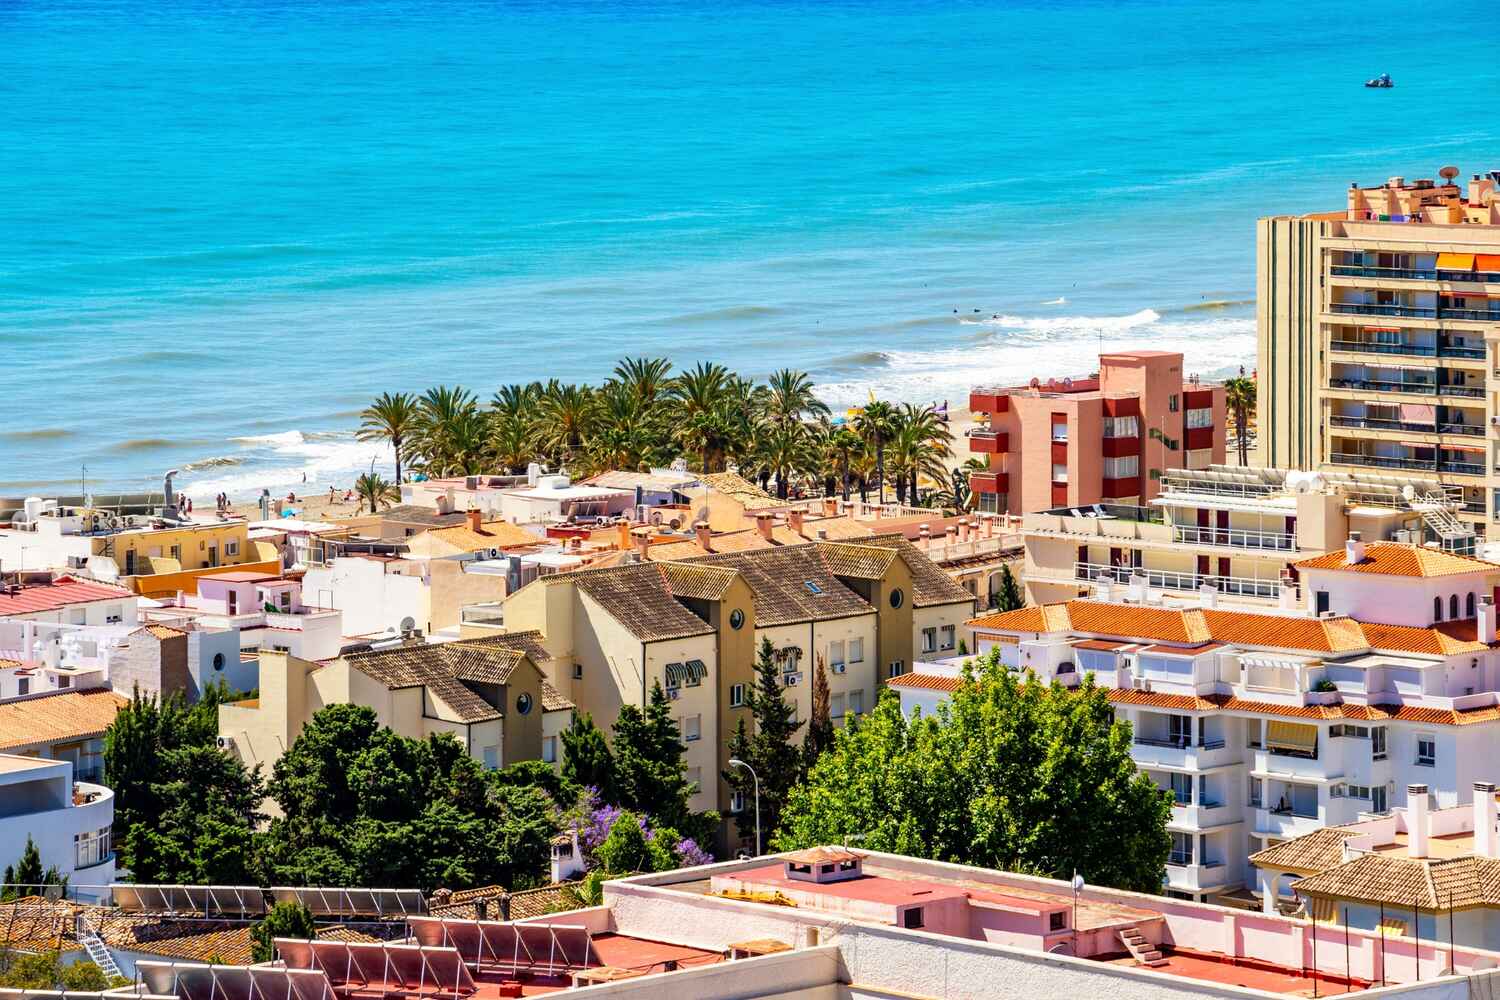 Sandy beachfront lined with buildings in Torremolinos, Spain, and turquoise Mediterranean waters.